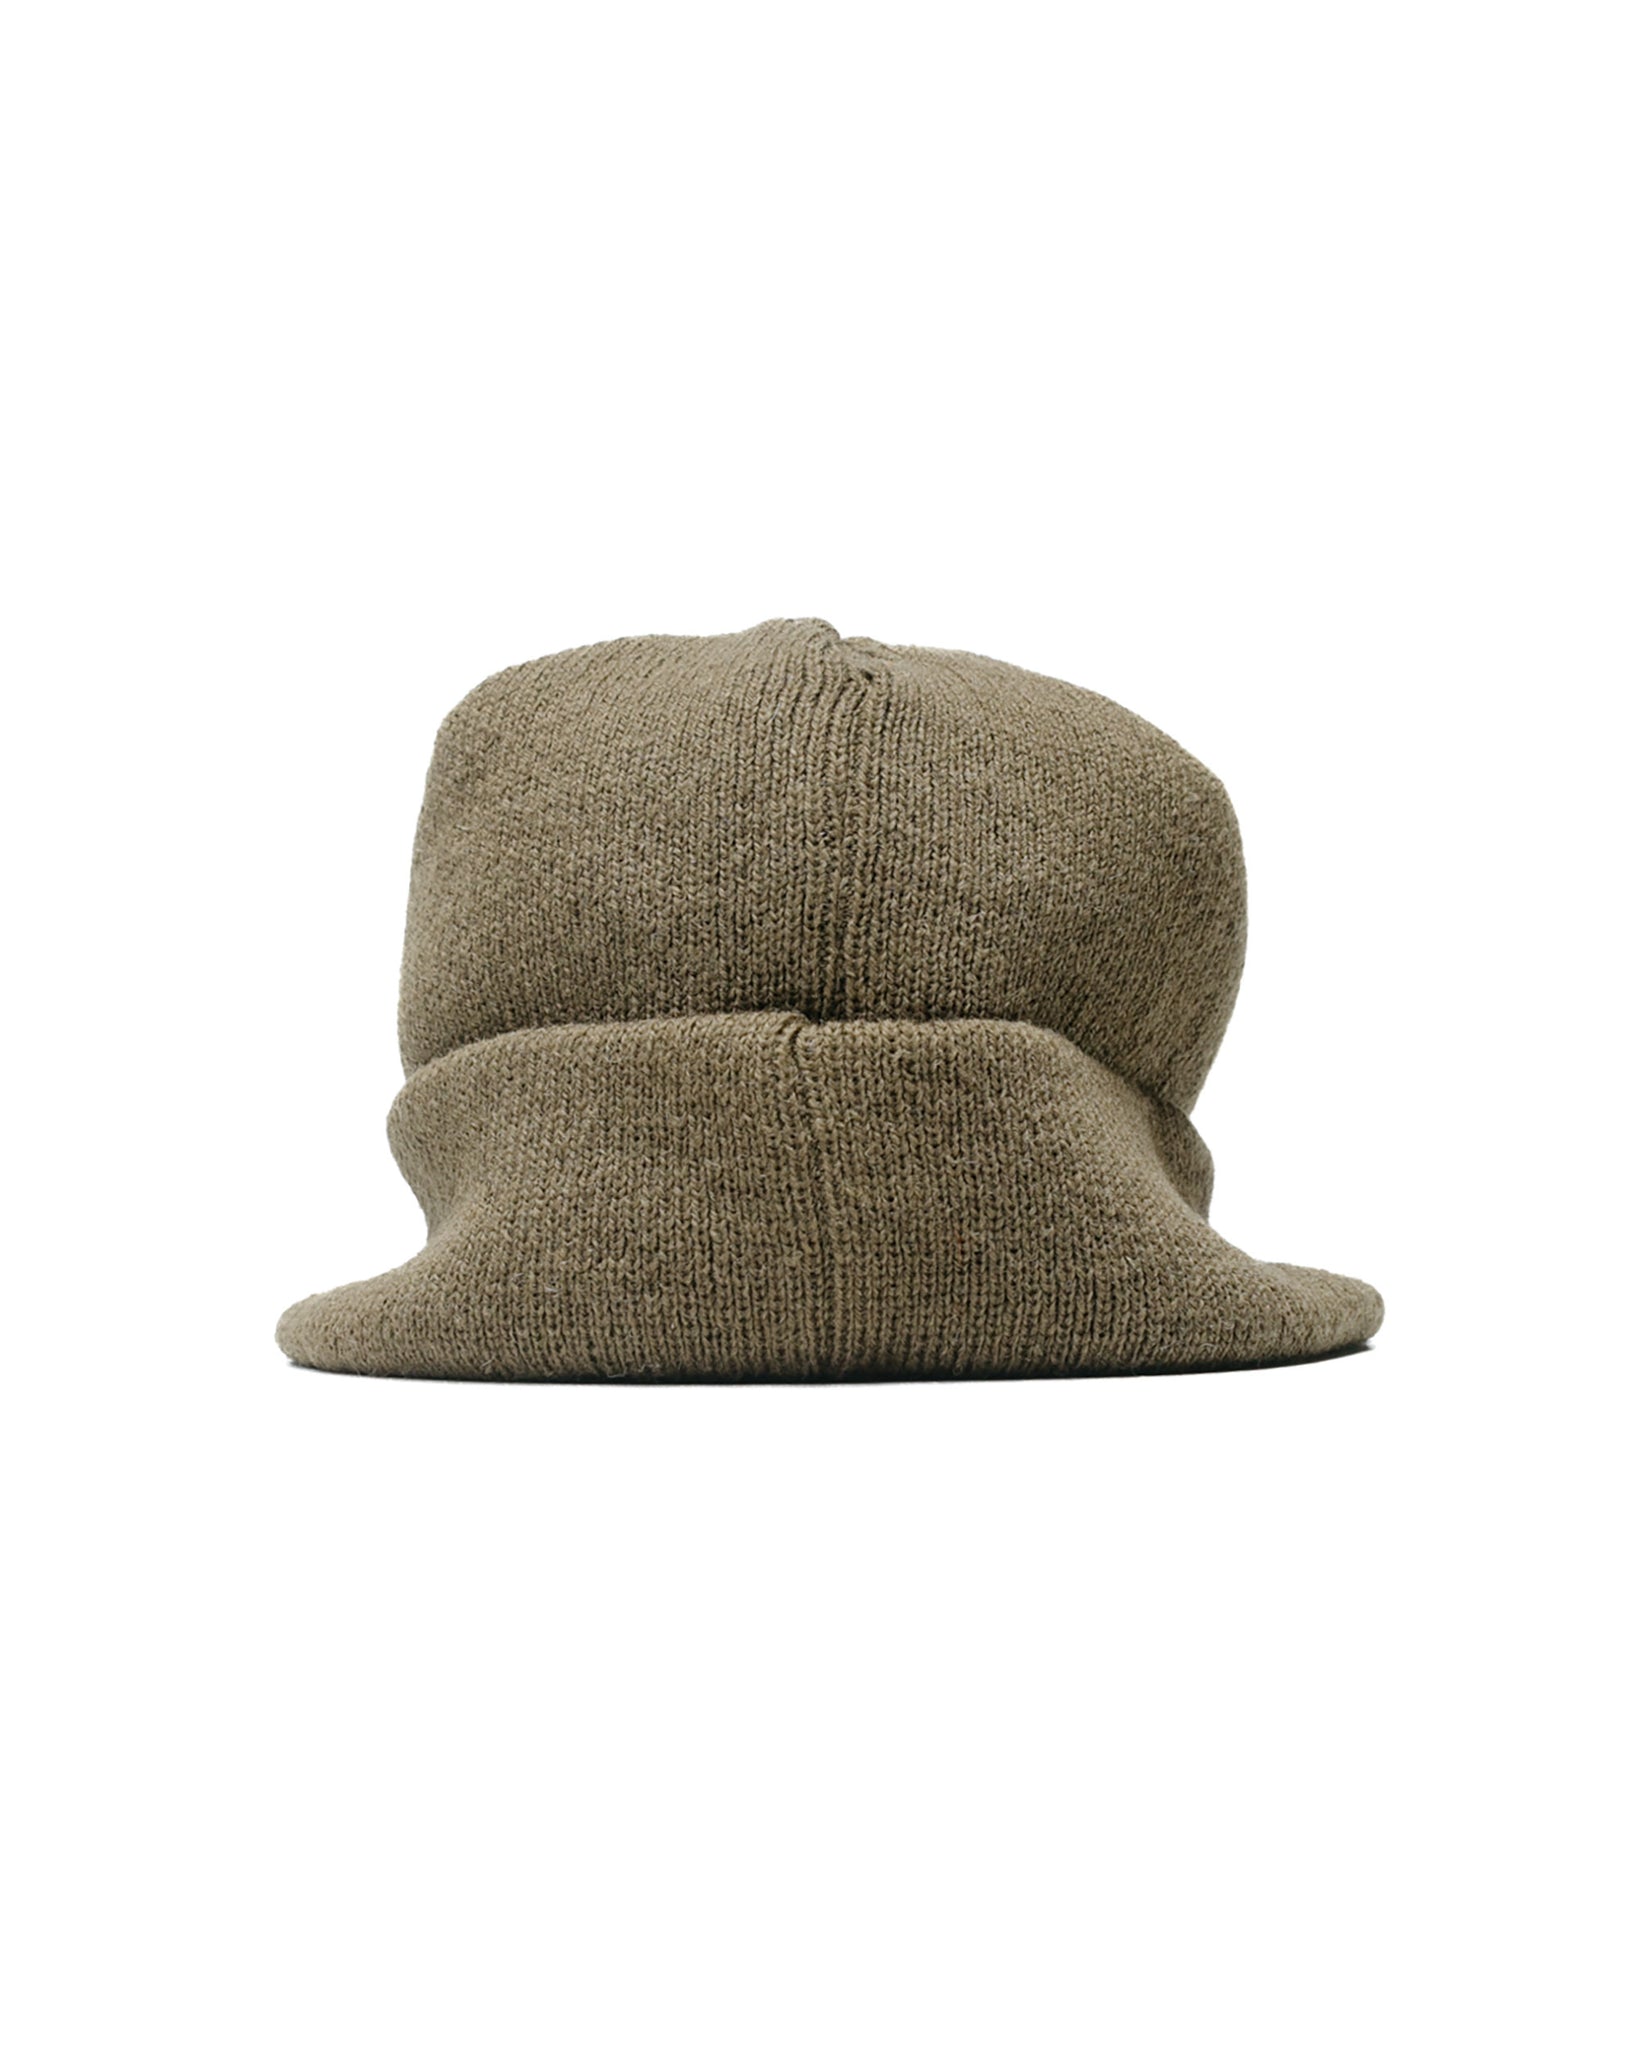 The Real McCoy's MA23105 Cap, Wool, Knit, M-1941 Olive back